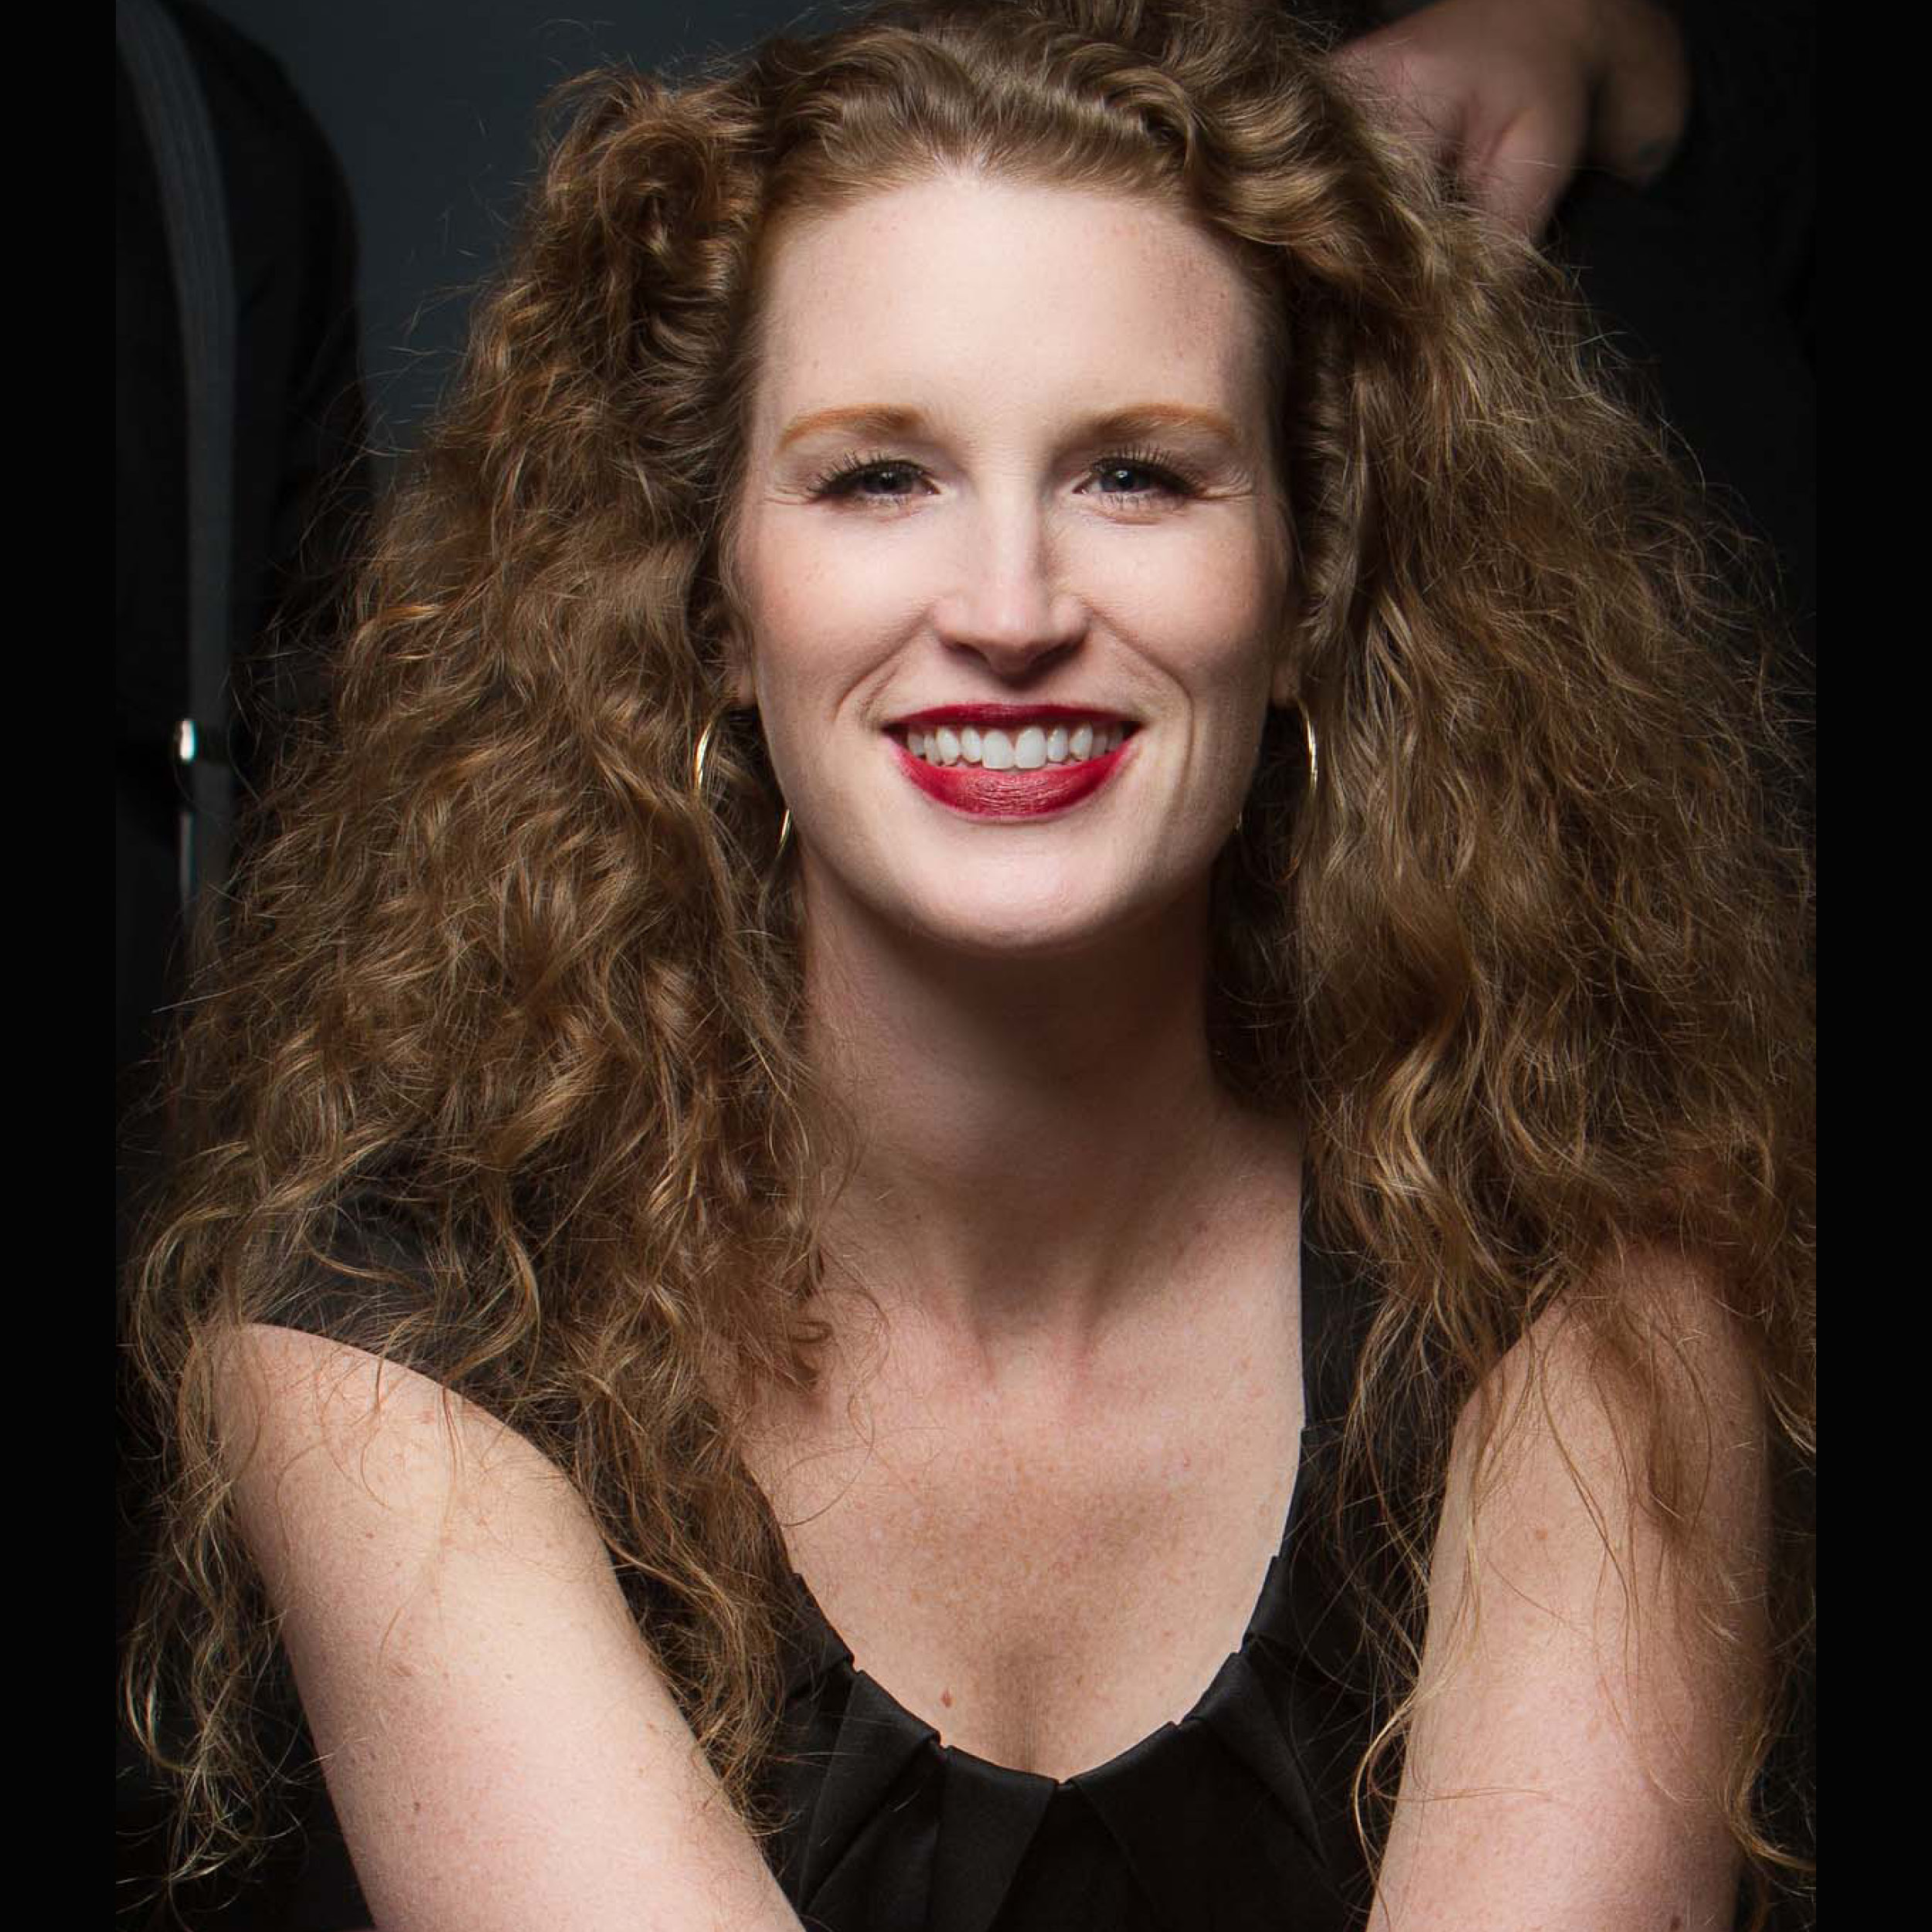 Image of woman with brown curly hair